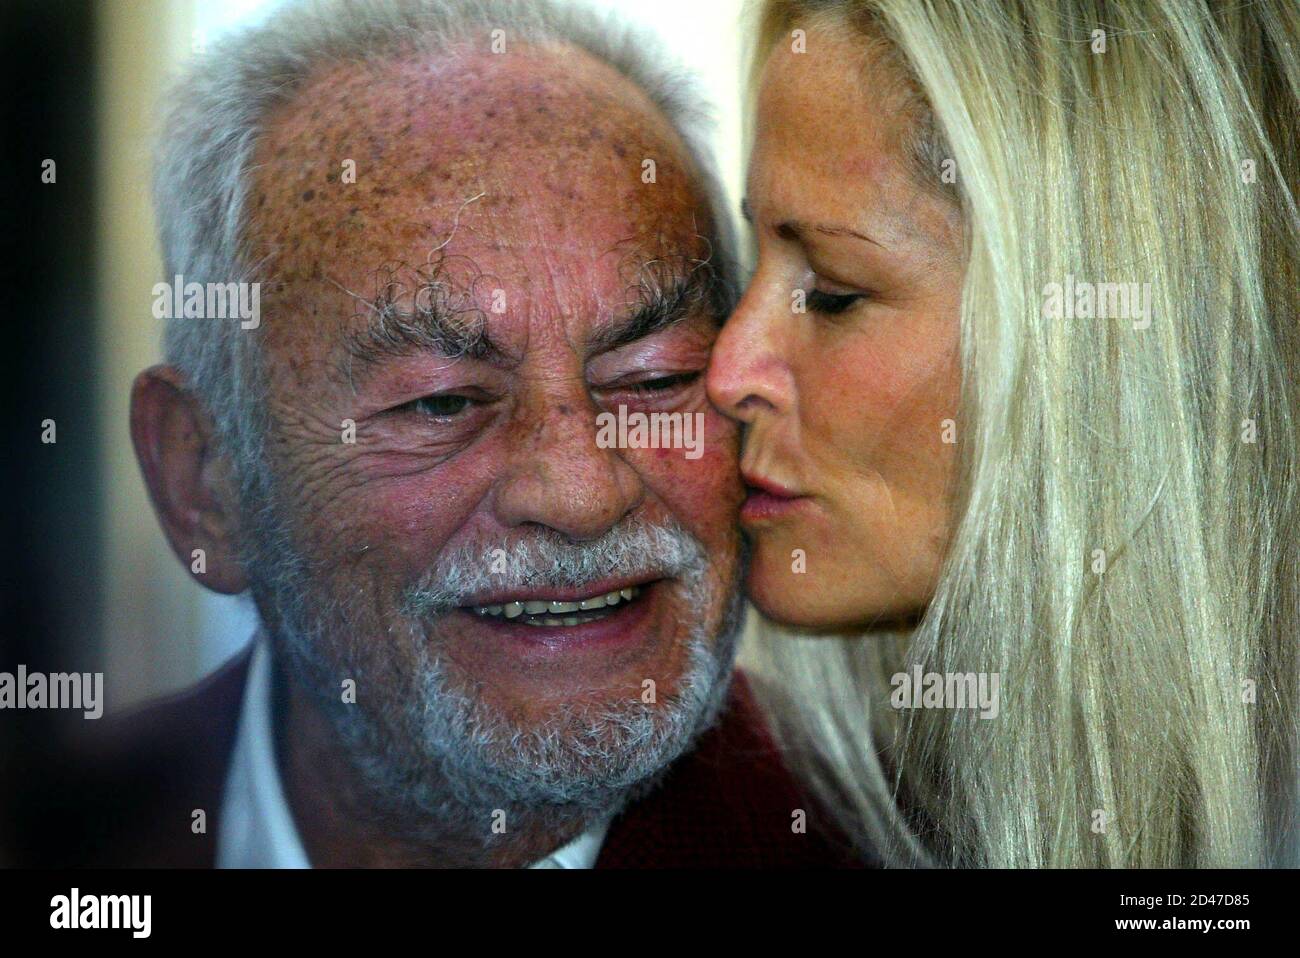 Legendary Italian film producer Dino di Laurentis smiles as he receives a  kiss from his wife Rita prior to a press conference at a hotel in central  Rome October 15, 2002. [Laurentis